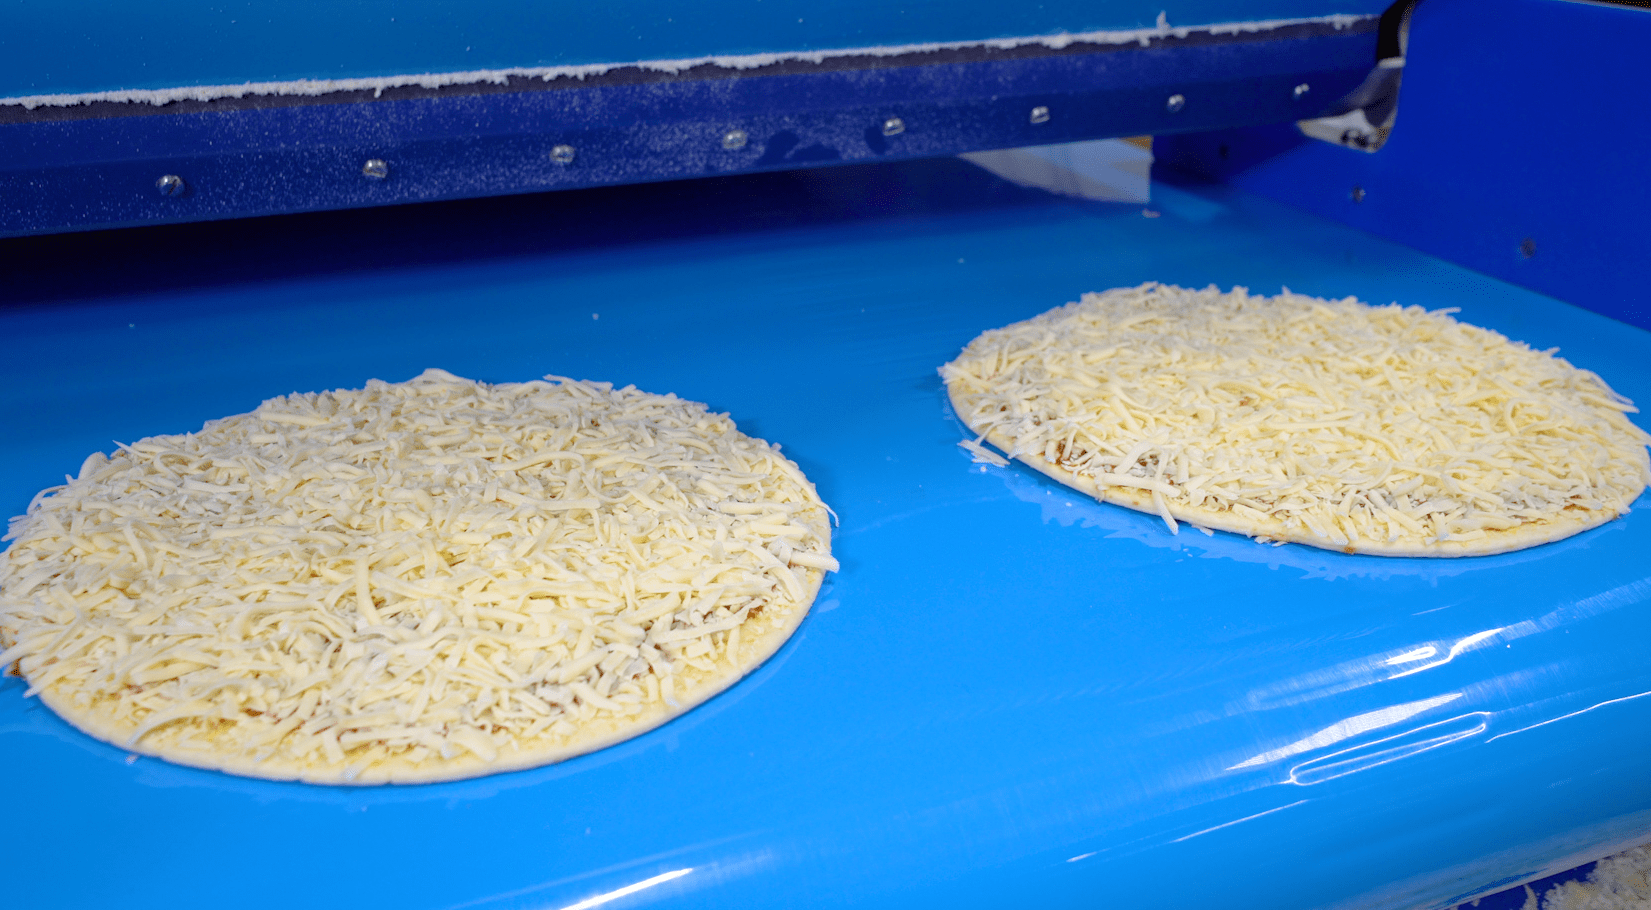 Two cheese pizzas moving through a pizza topping applicator machine. 